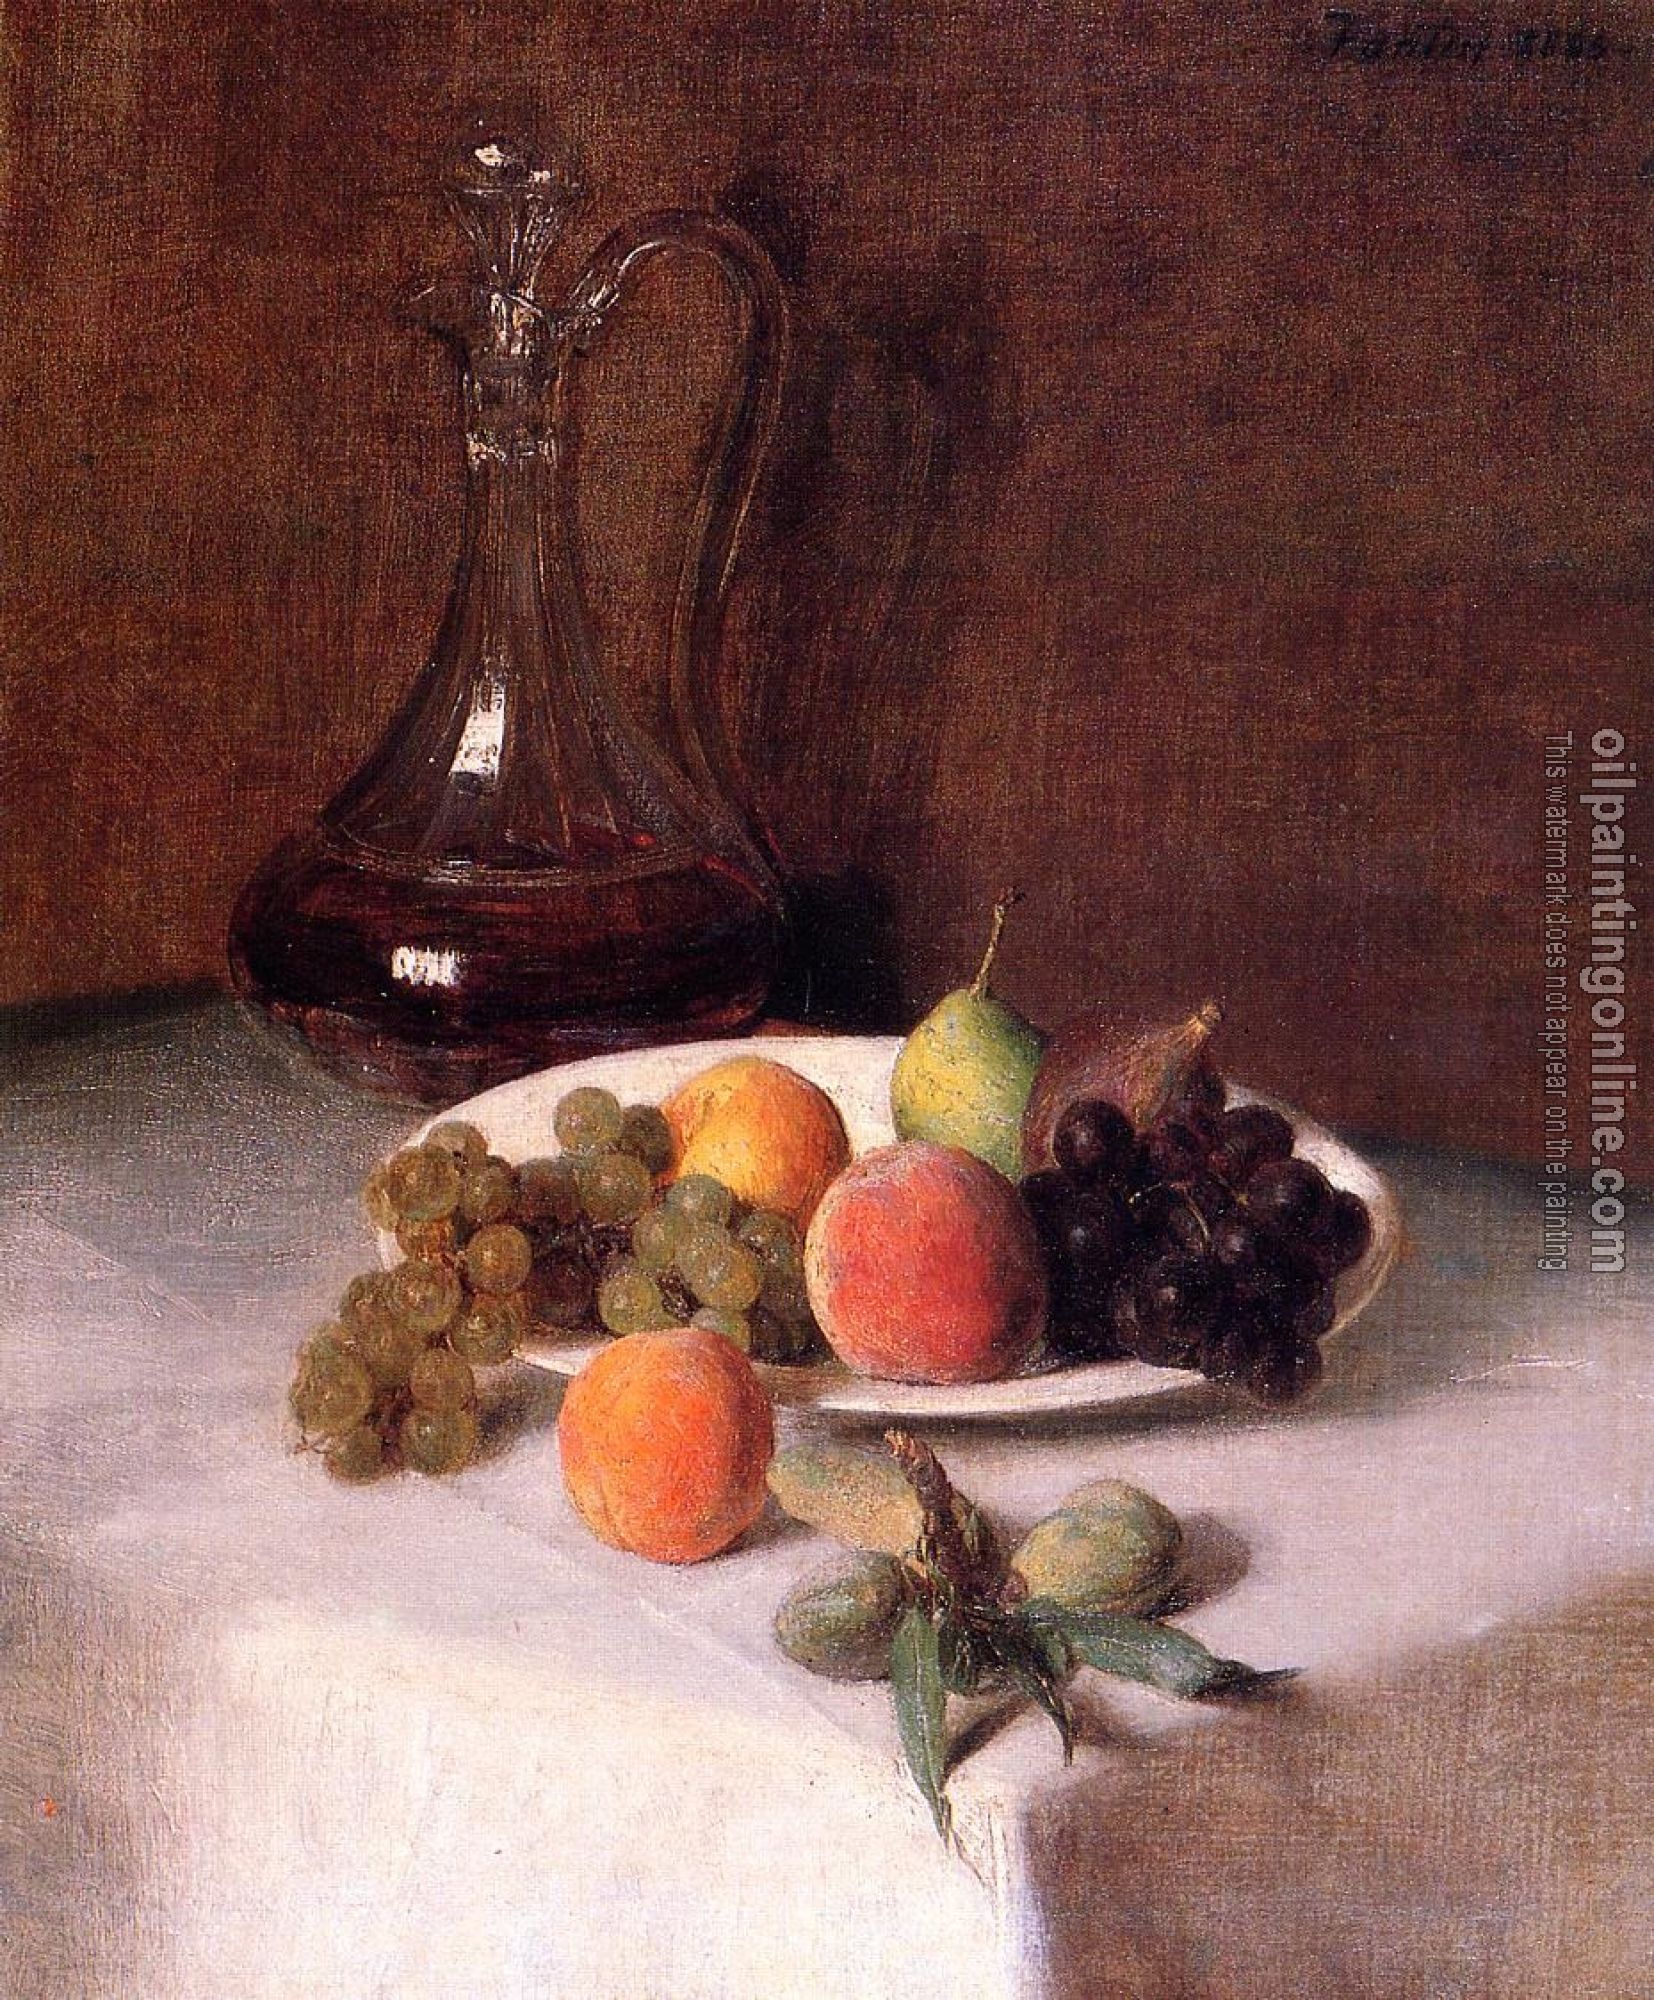 Fantin-Latour, Henri - A Carafe of Wine and Plate of Fruit on a White Tablecloth